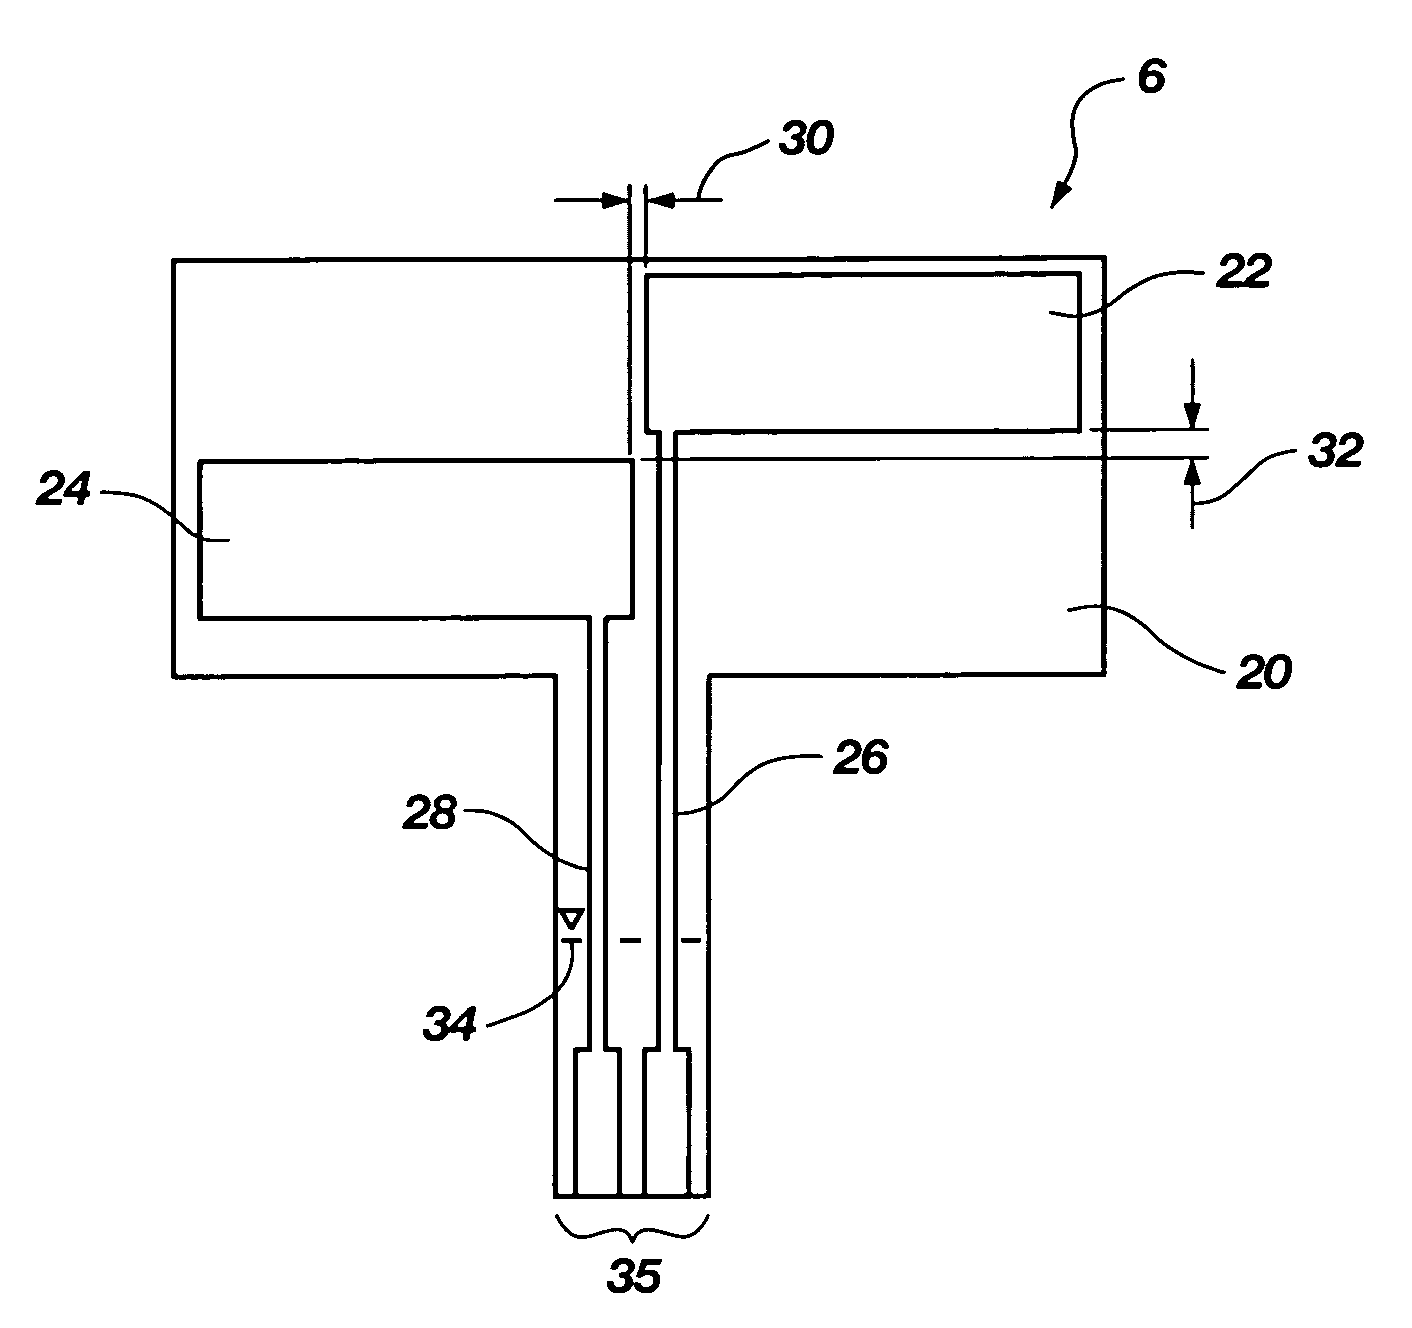 Method and apparatus for detection of fluid level in a container